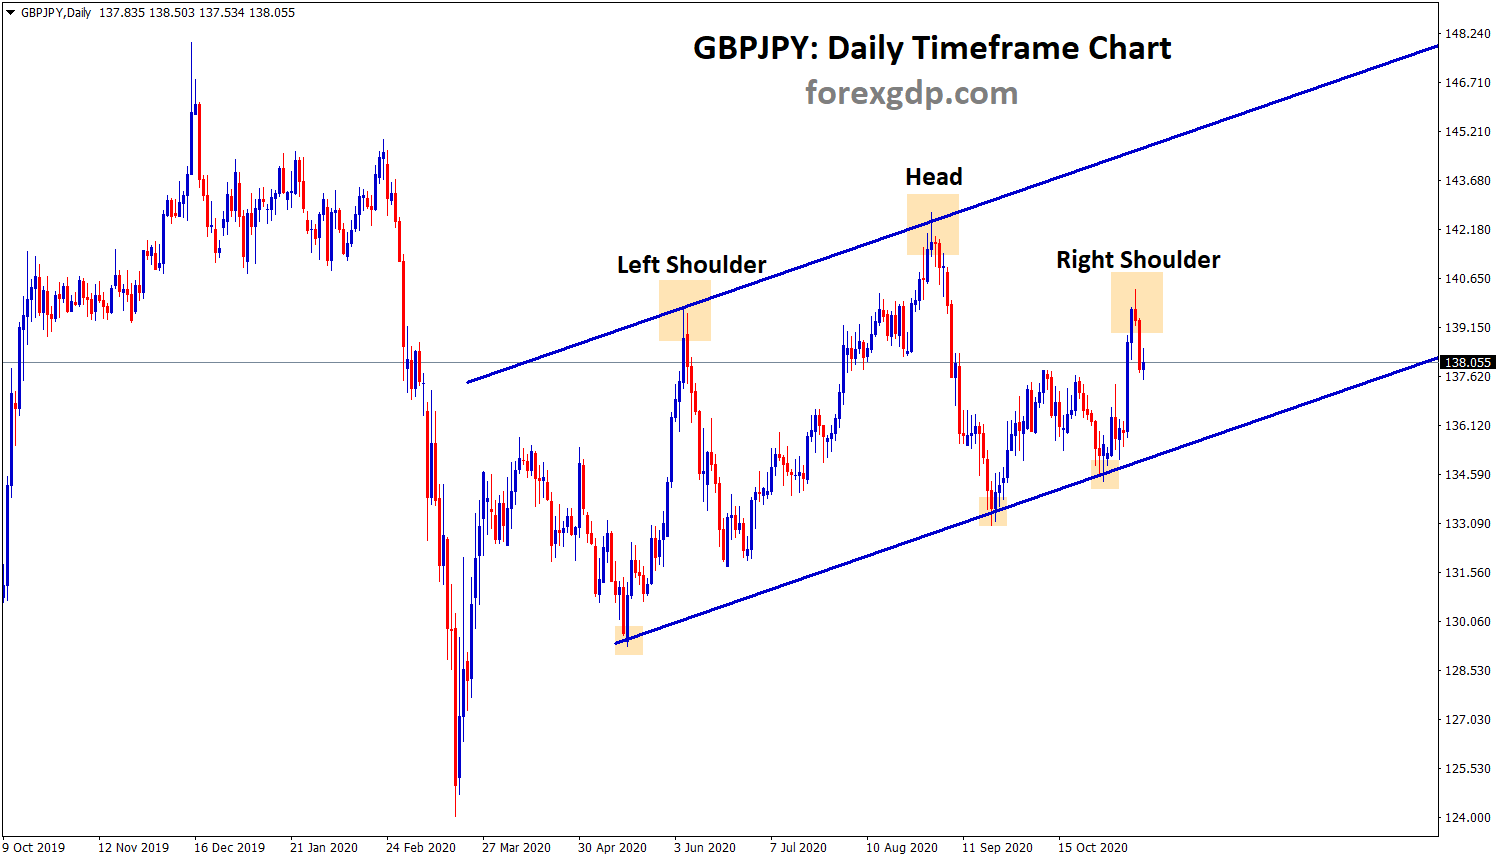 gbpjpy head and shoulder